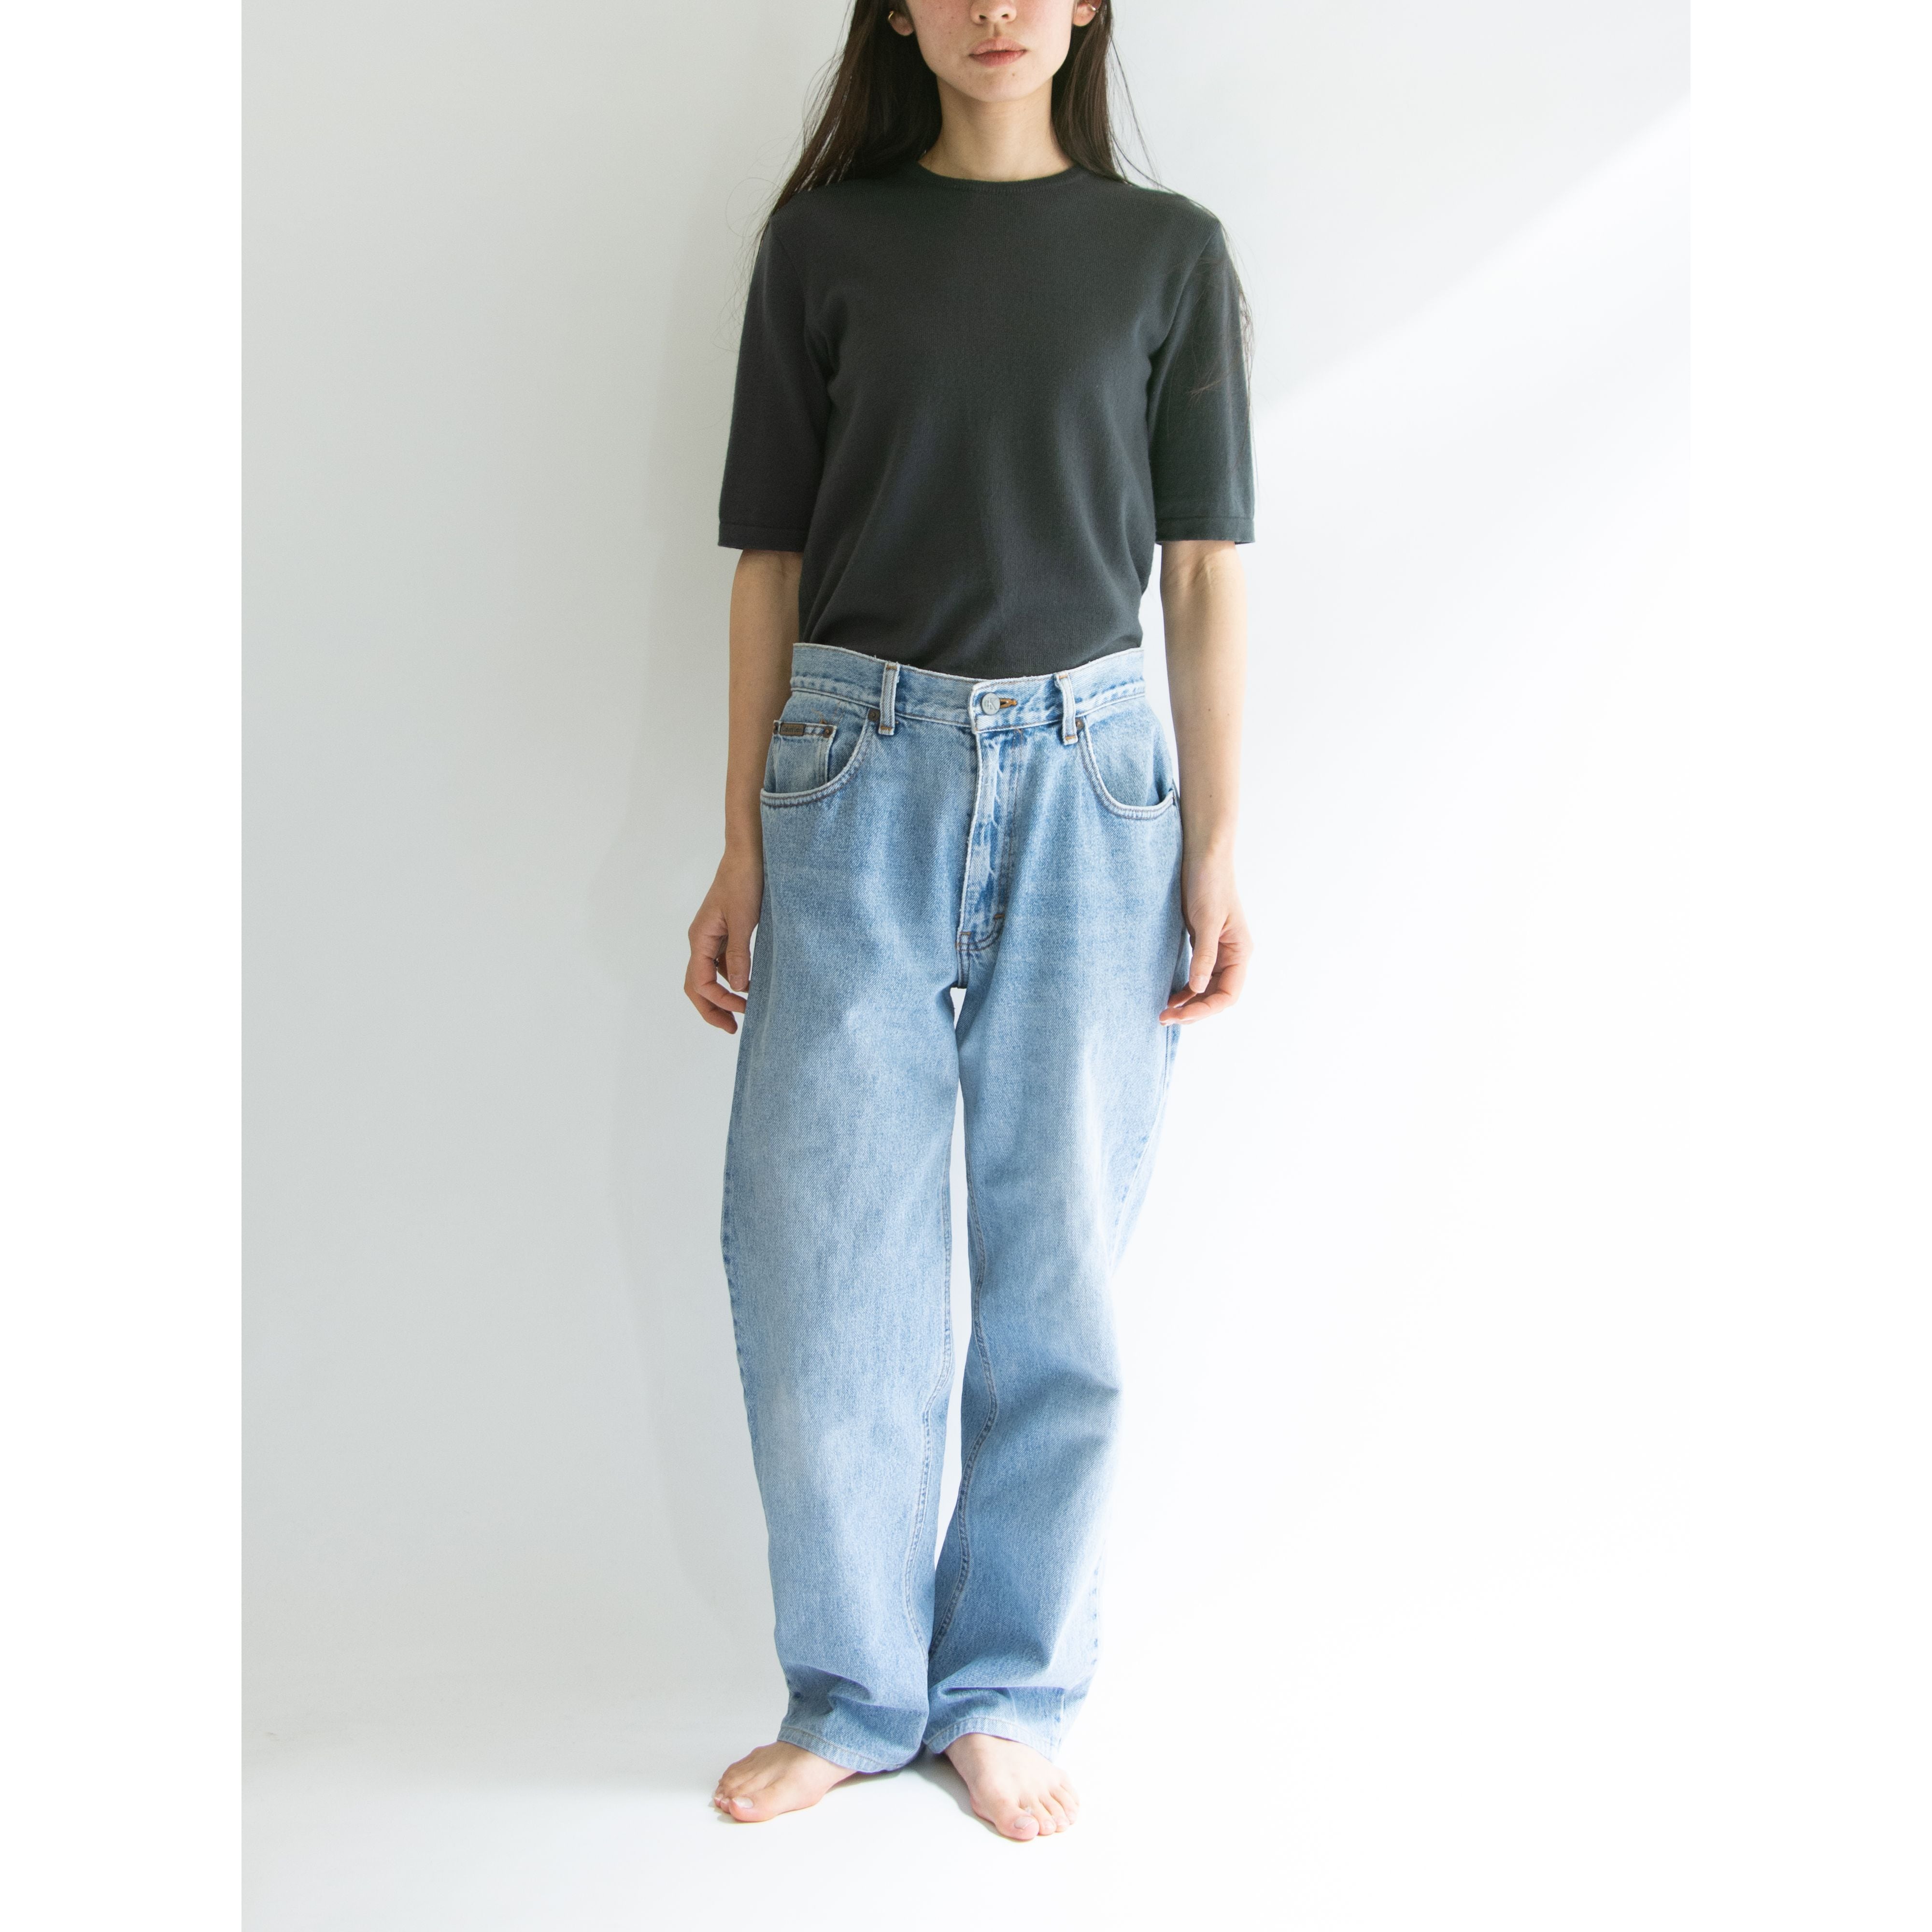 【Calvin Klein Jeans】Made in U.S.A. 100% Cotton Easy Fit Denim Pants  Jeans（カルバンクラインアメリカ製イージーフィット デニムパンツ ジーンズ） | MASCOT/E powered by BASE